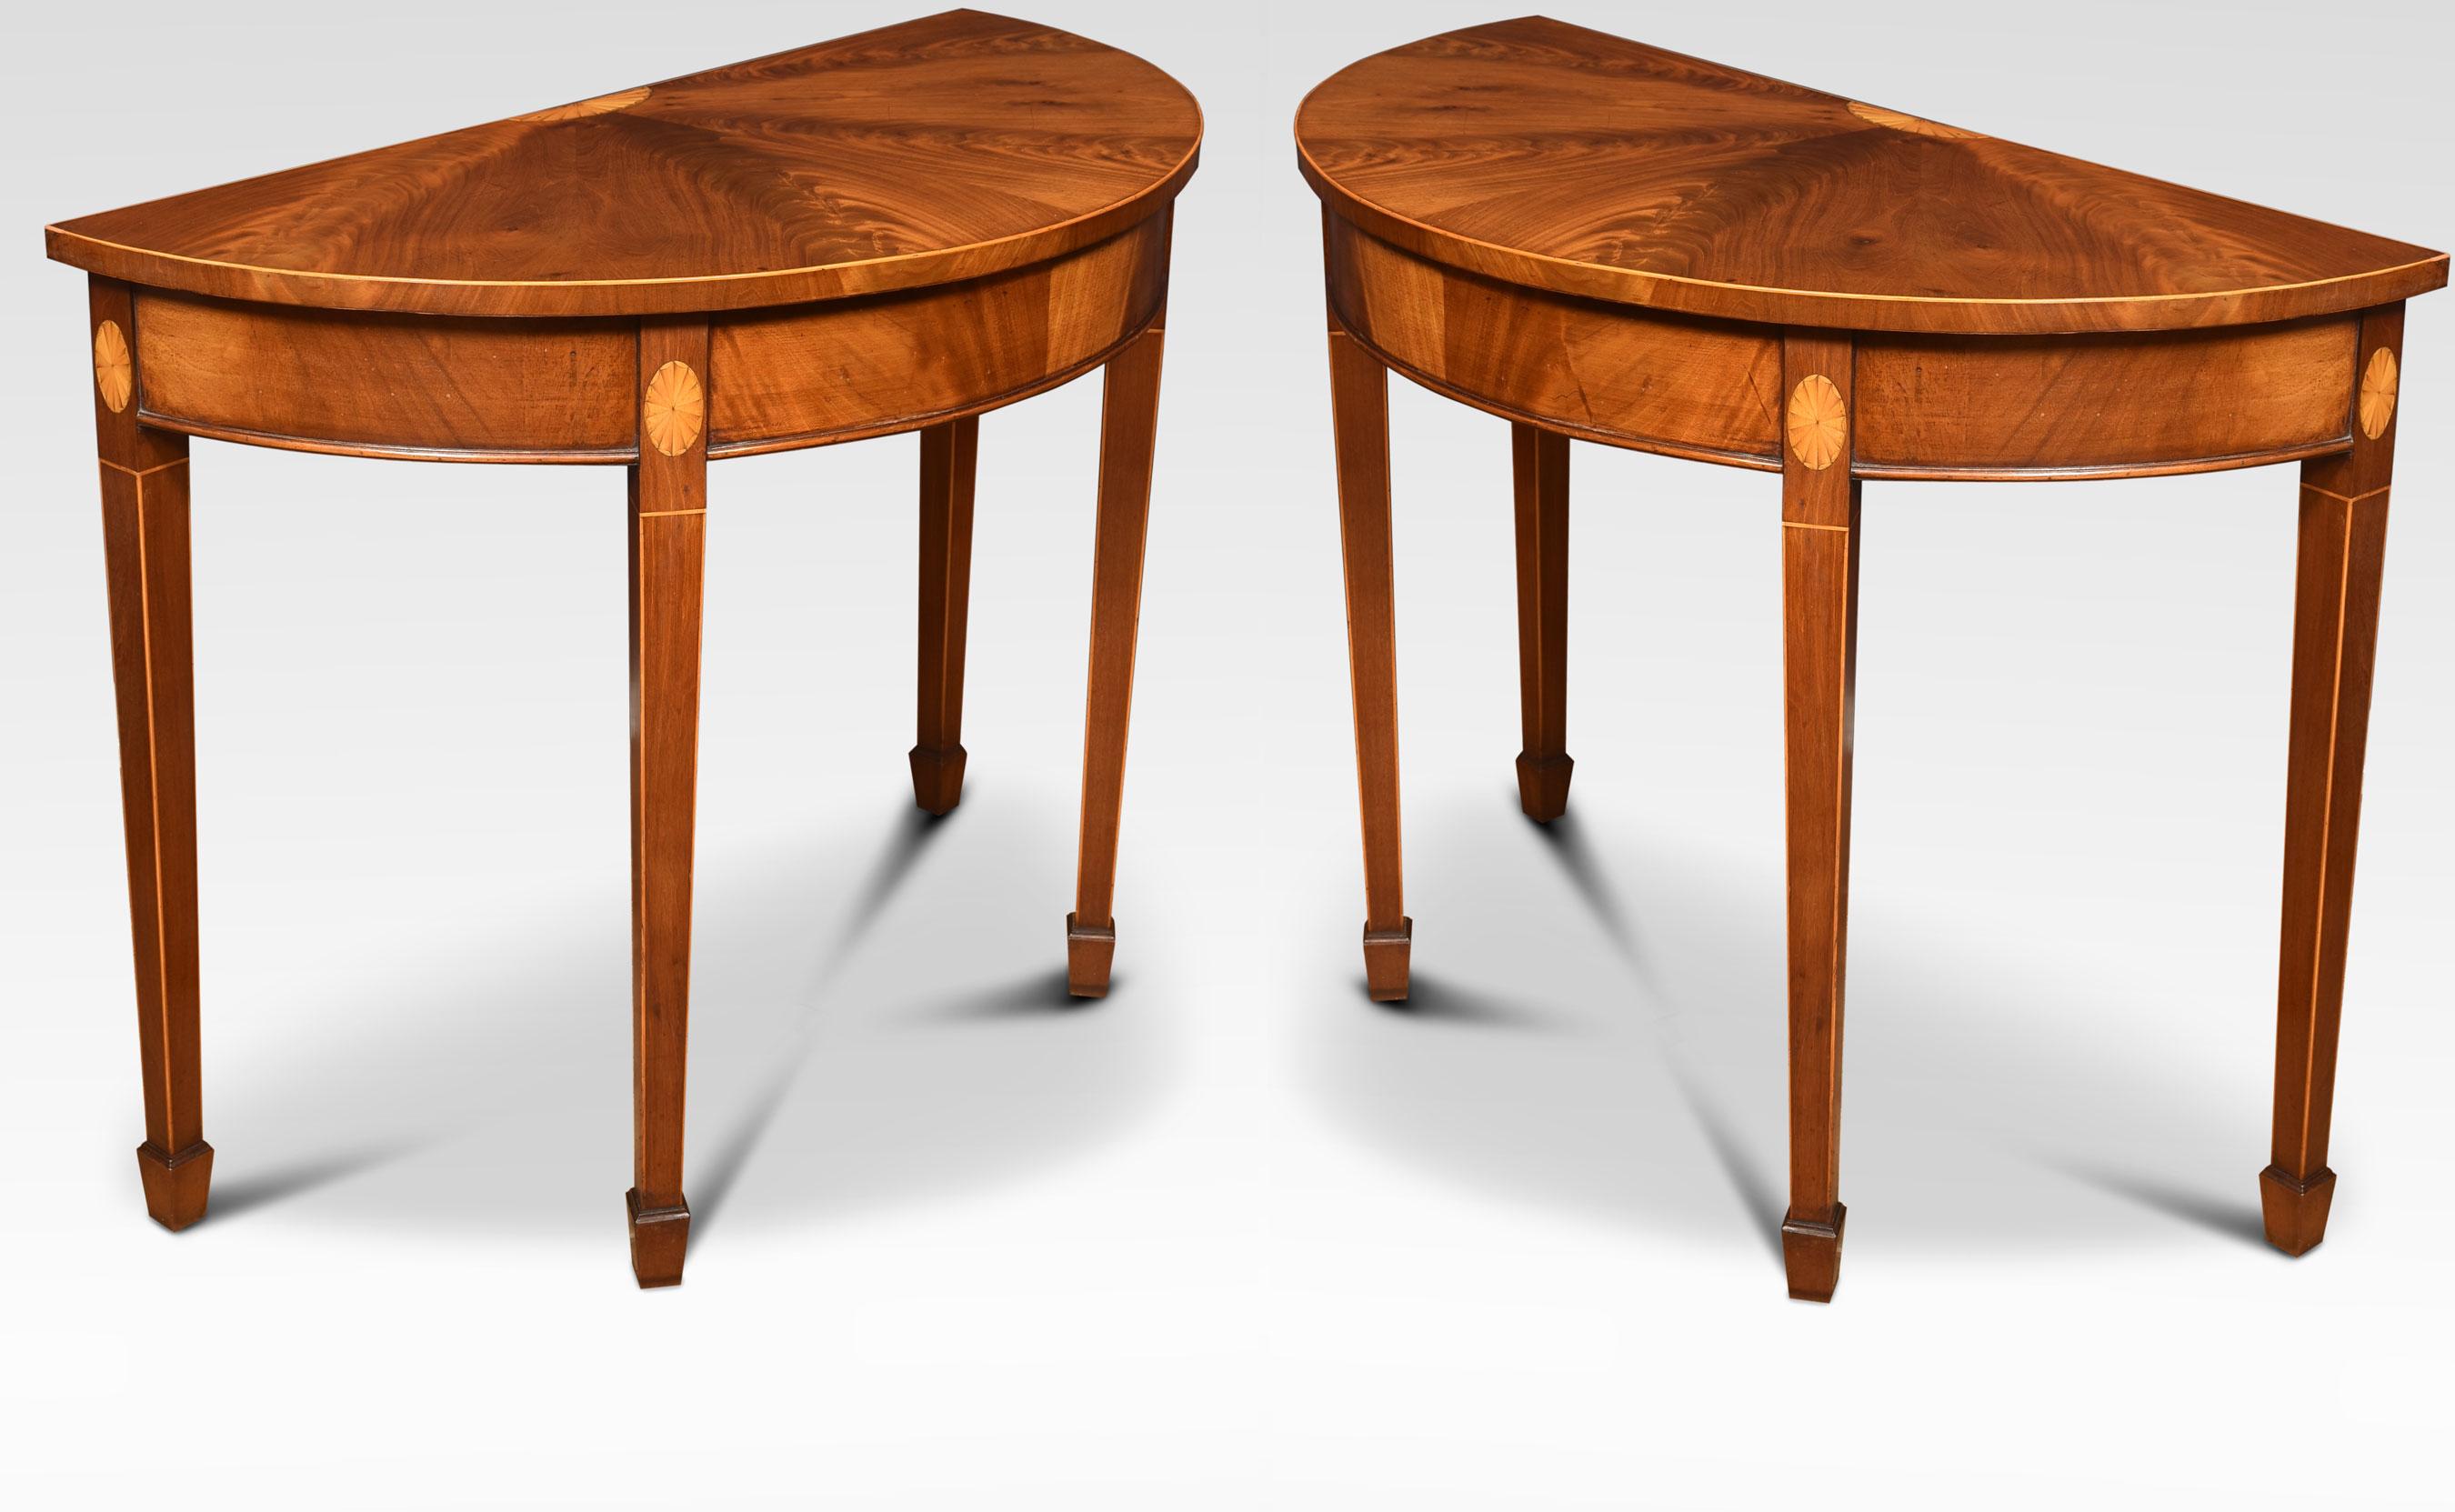 Pair of inlaid hall tables